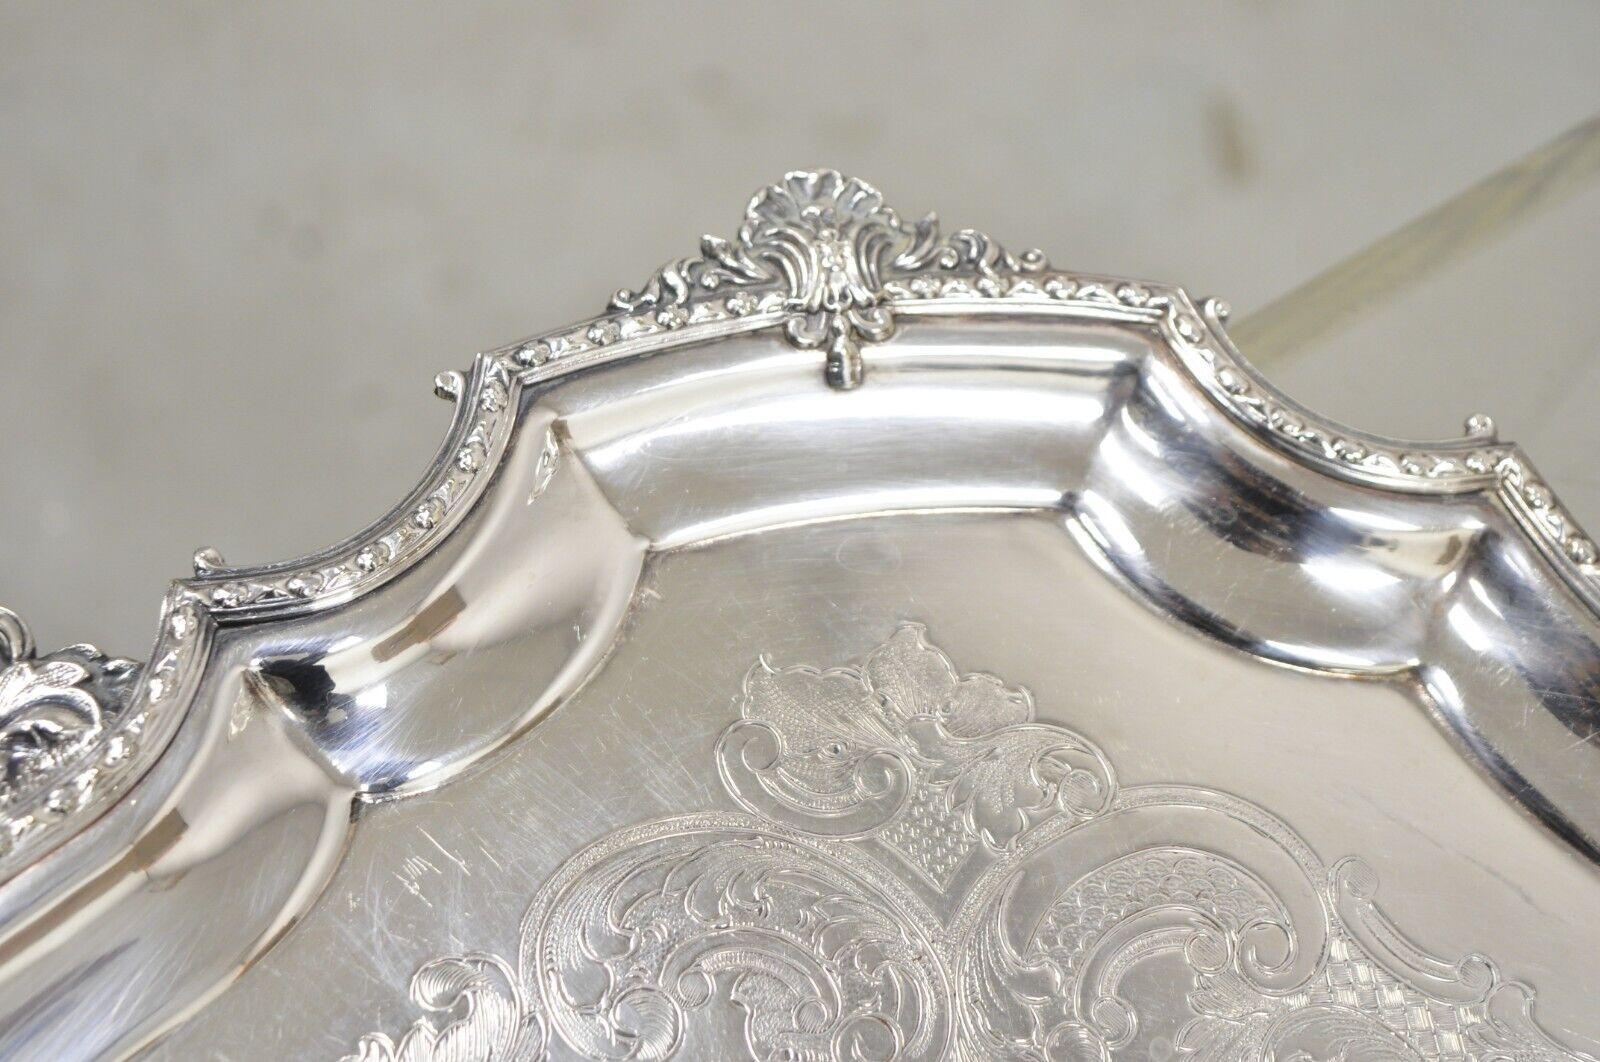 Victorian WA England Silver Plated Ornate Twin Handle Serving Platter Tray For Sale 2